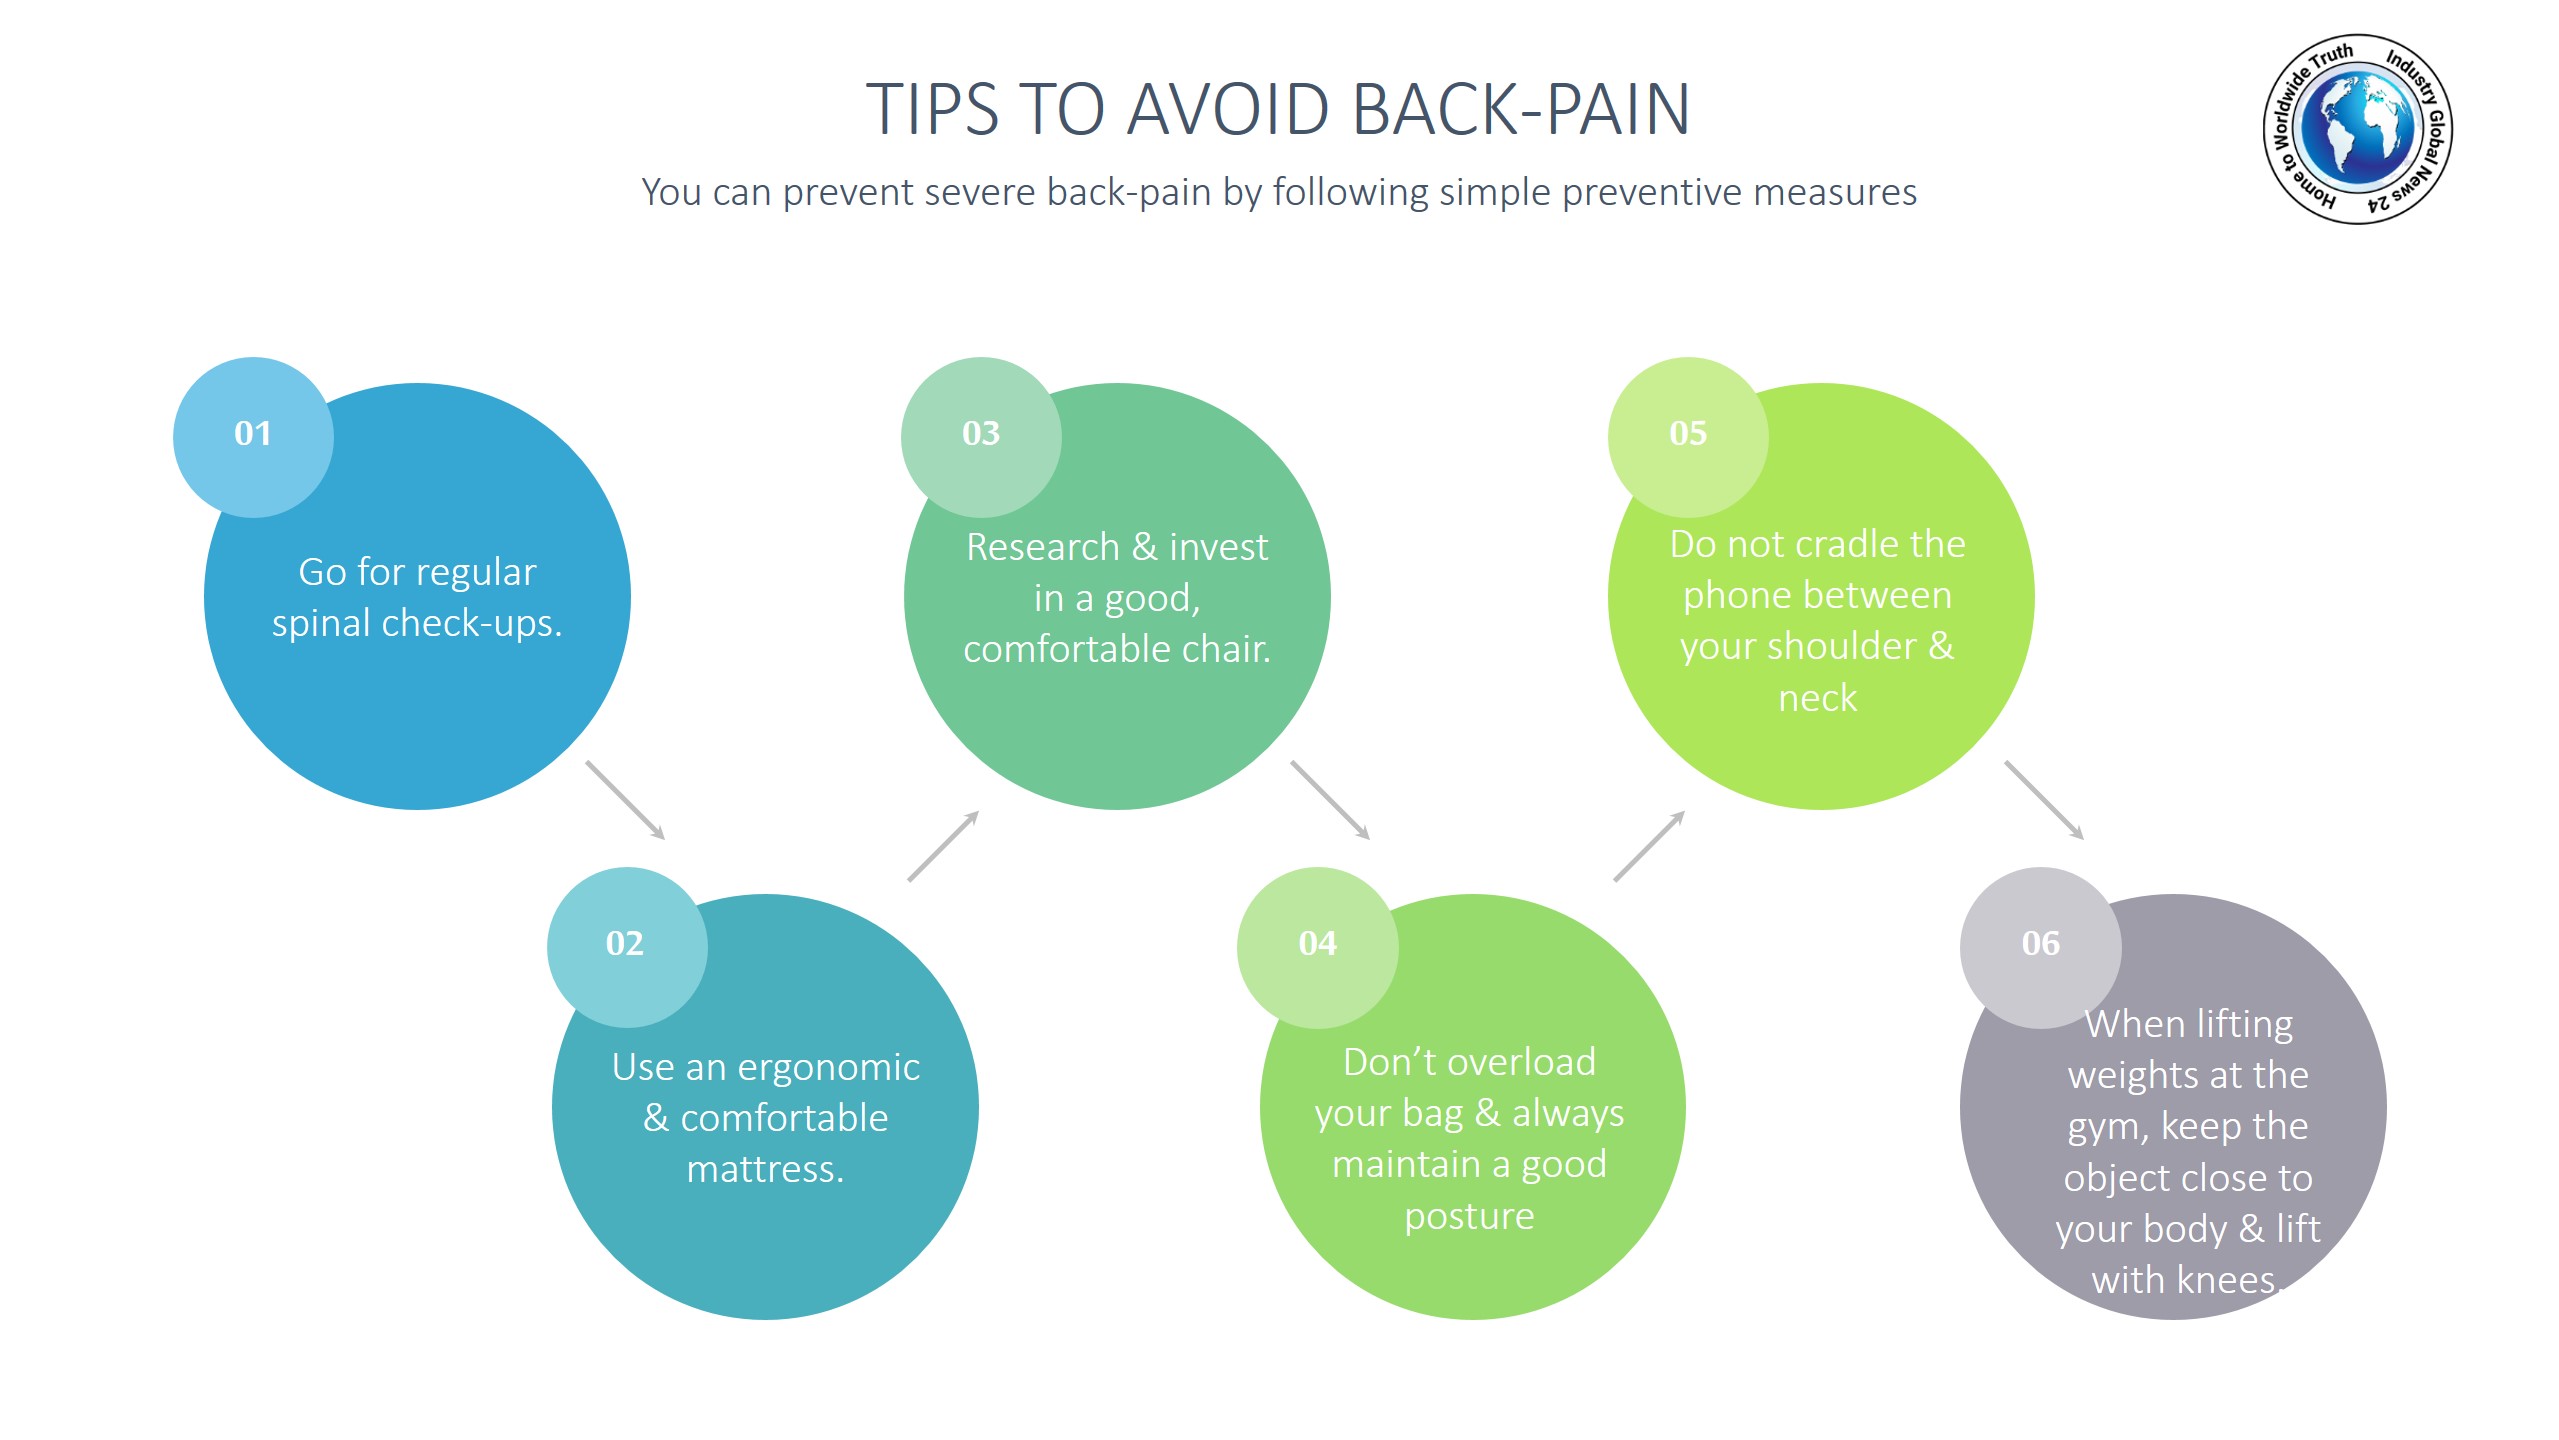 Tips to avoid back-pain